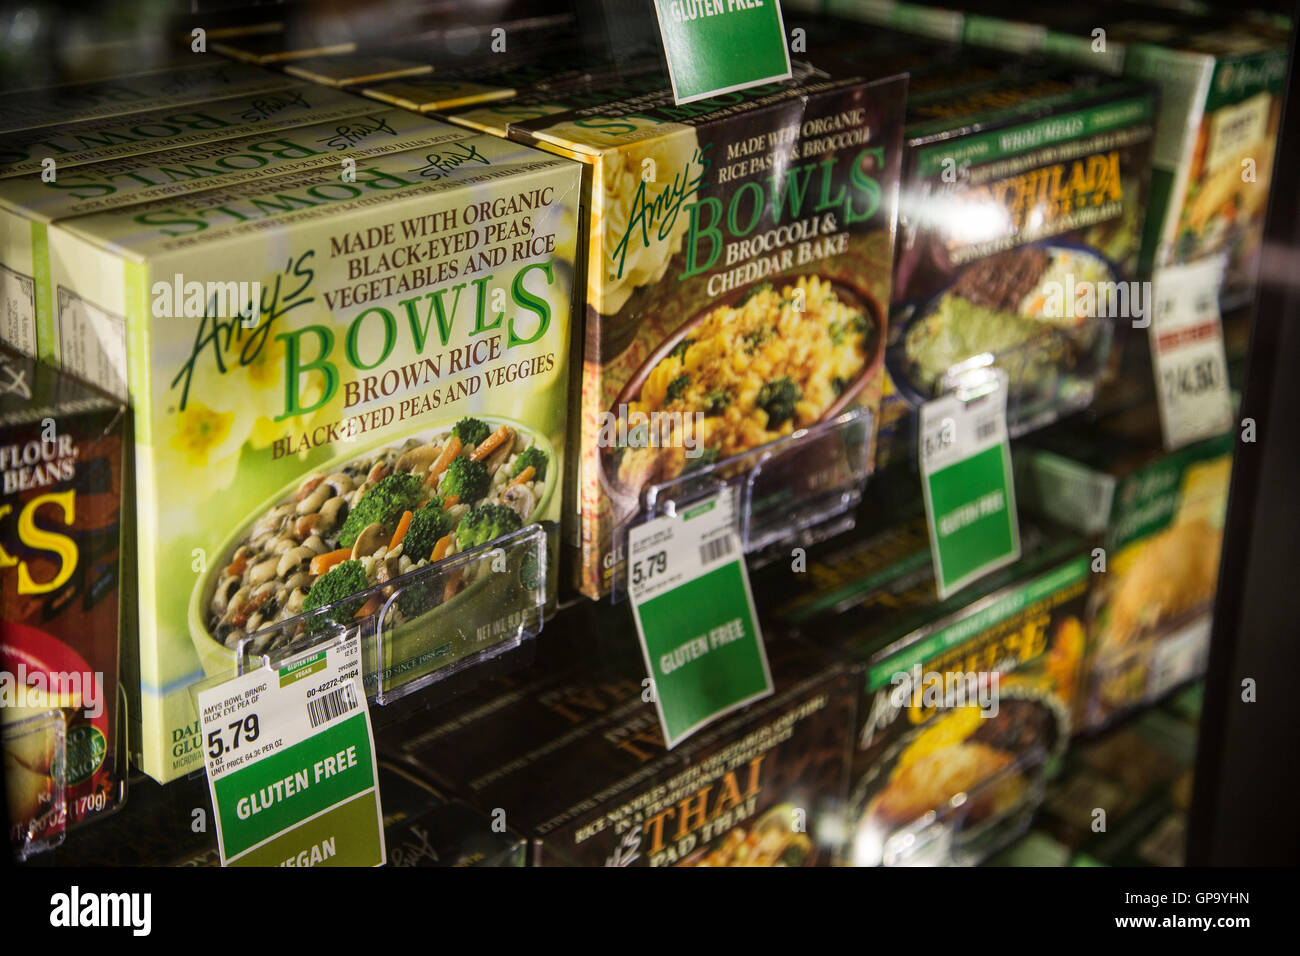 Boxes of Amy's organic meals in the freezer case of a grocery store Stock Photo